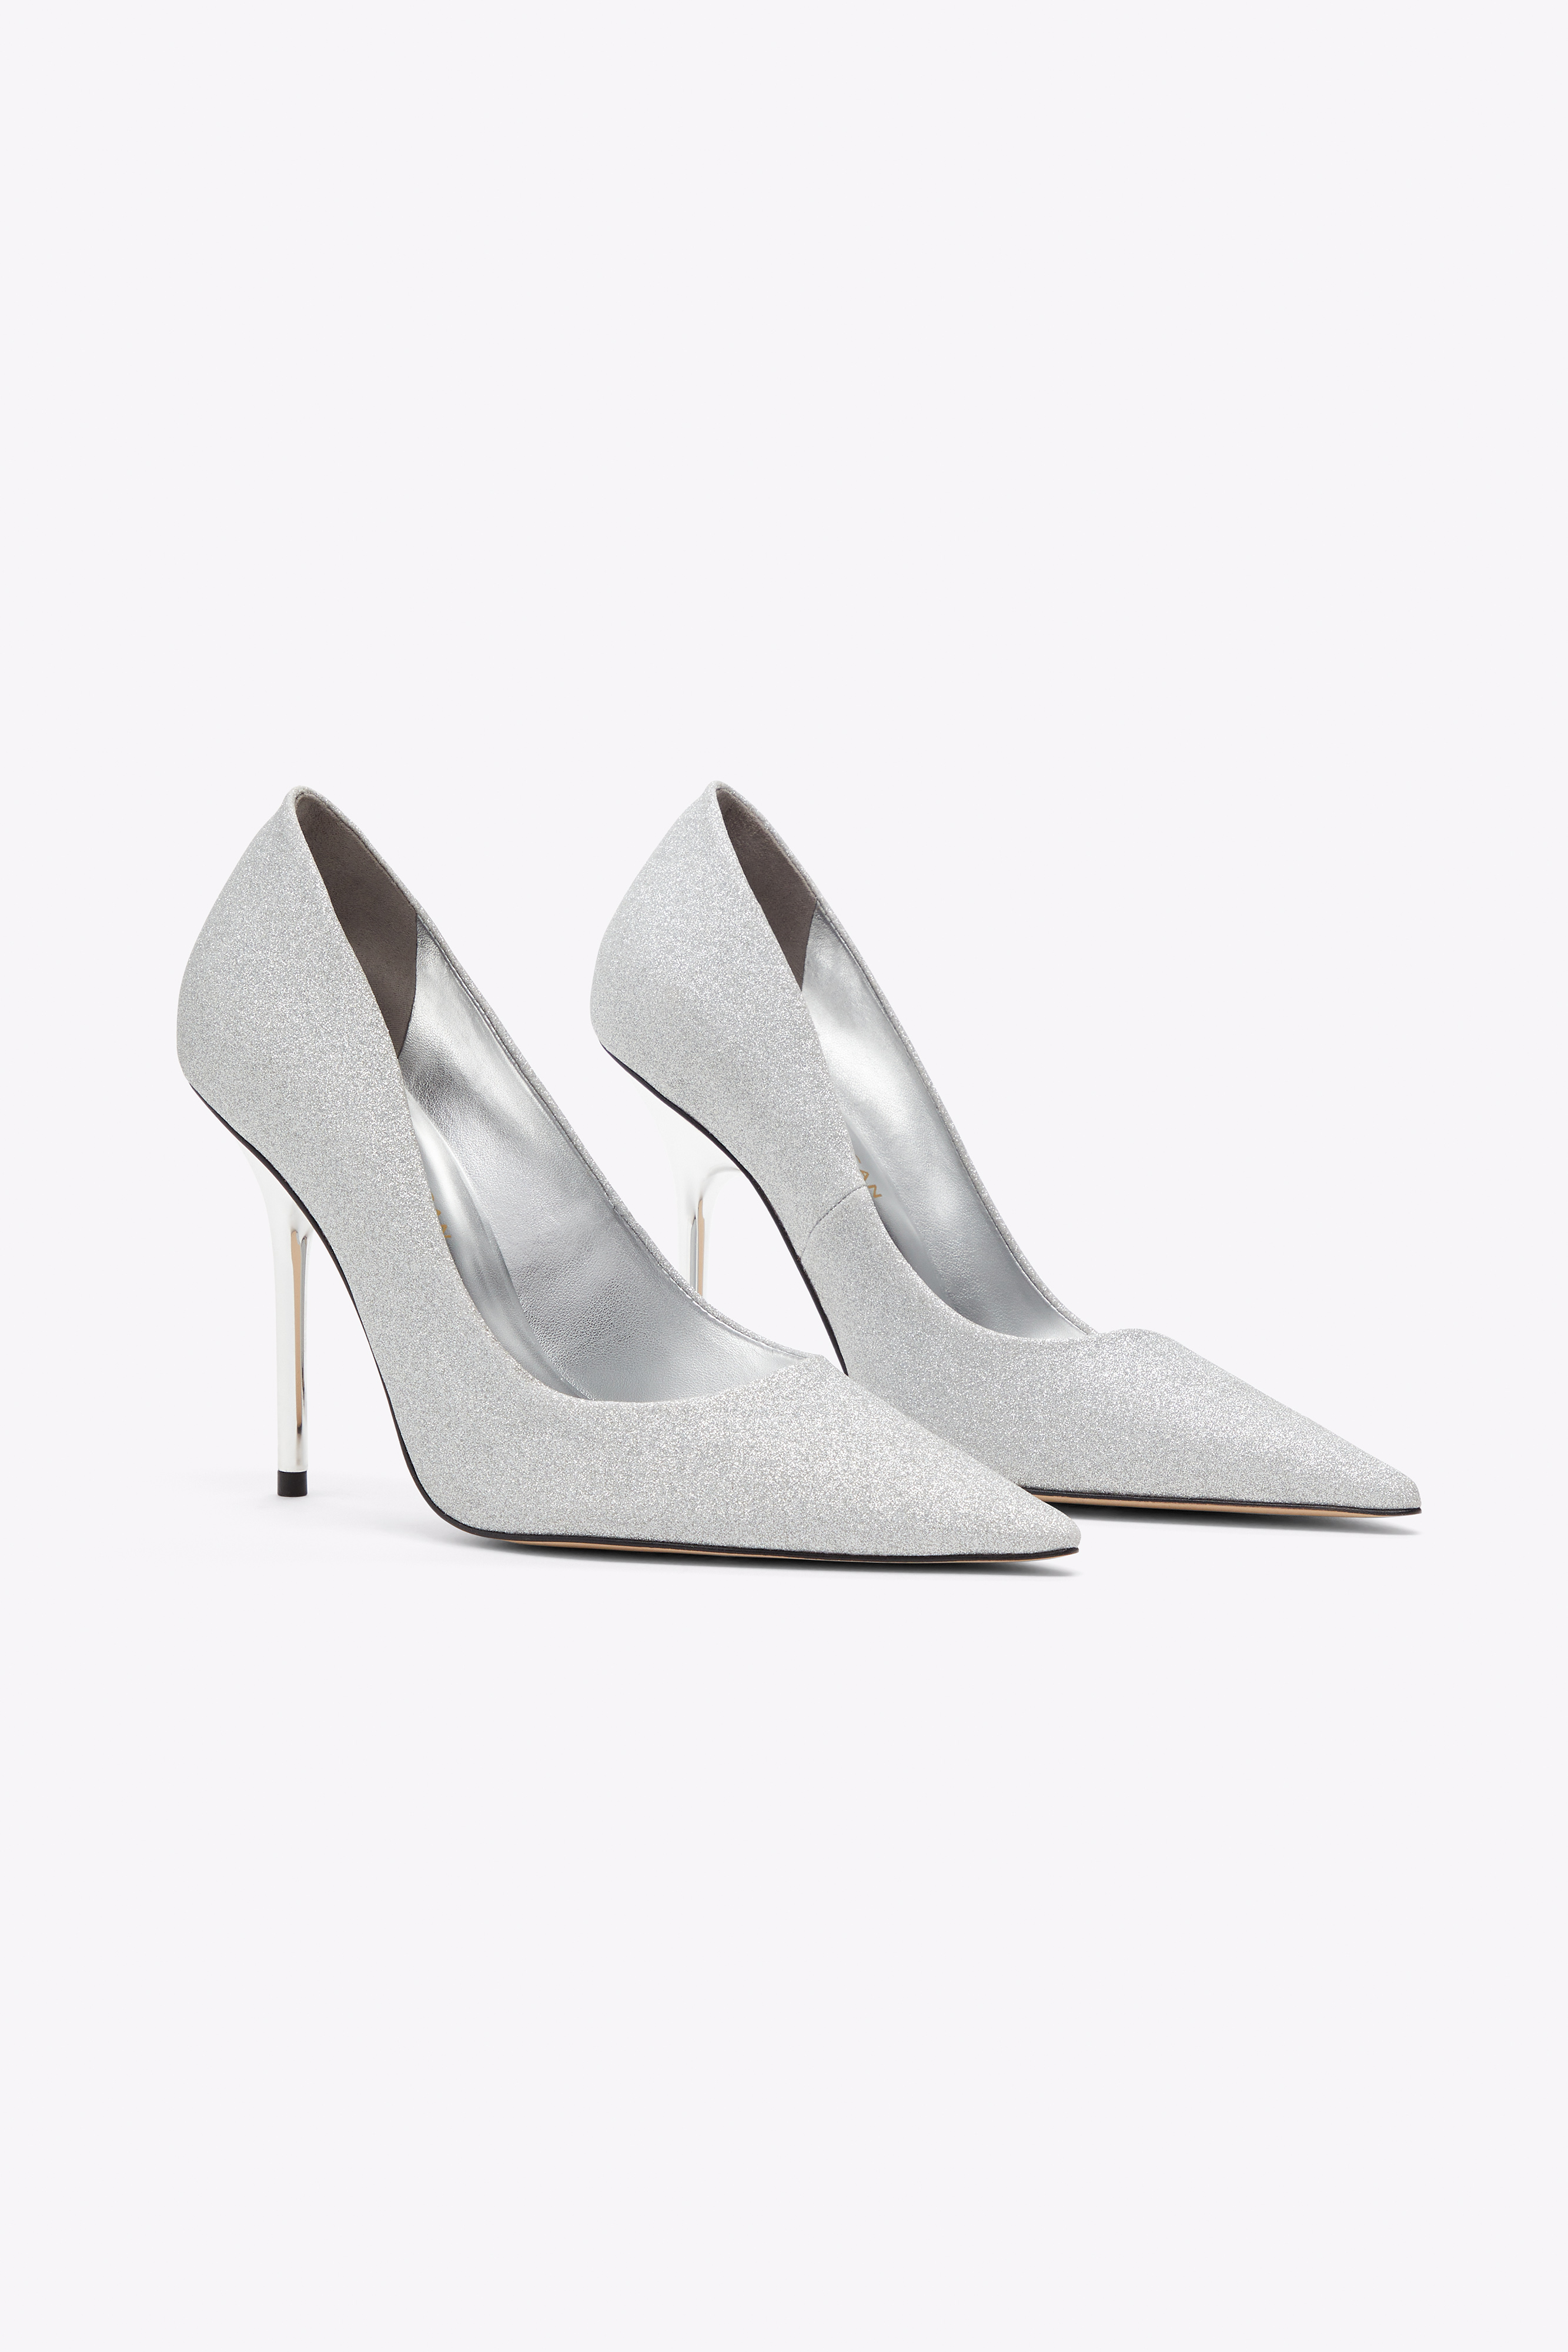 Styled with CLASSIC GLITTER HEEL | SILVER GLITTER